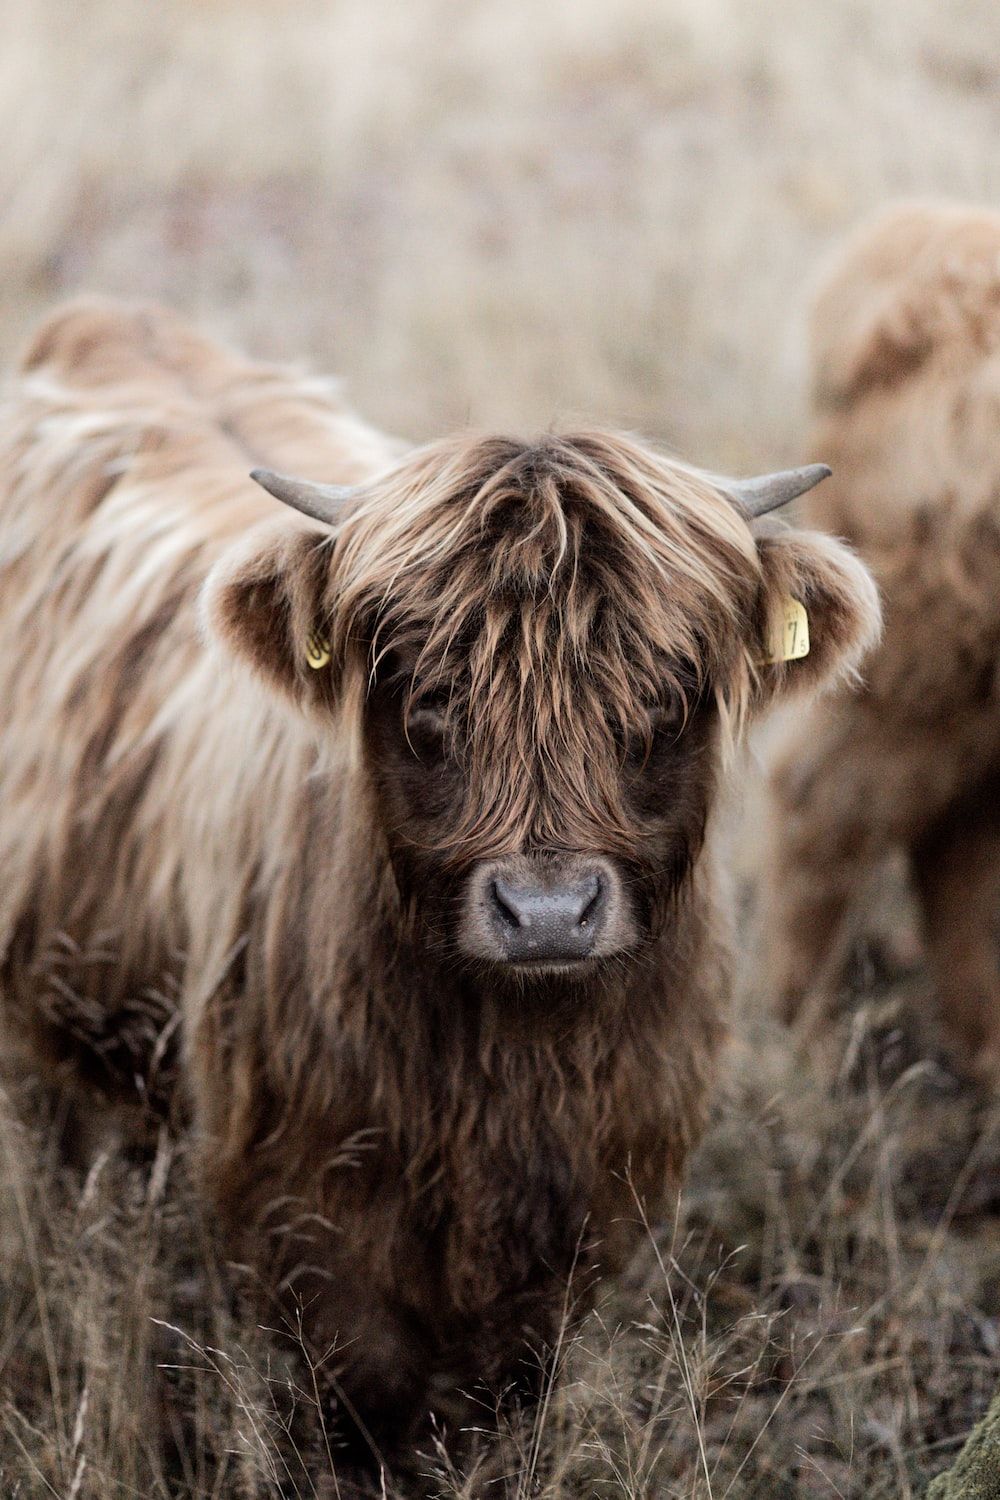 A couple of yaks in the grass - Cow